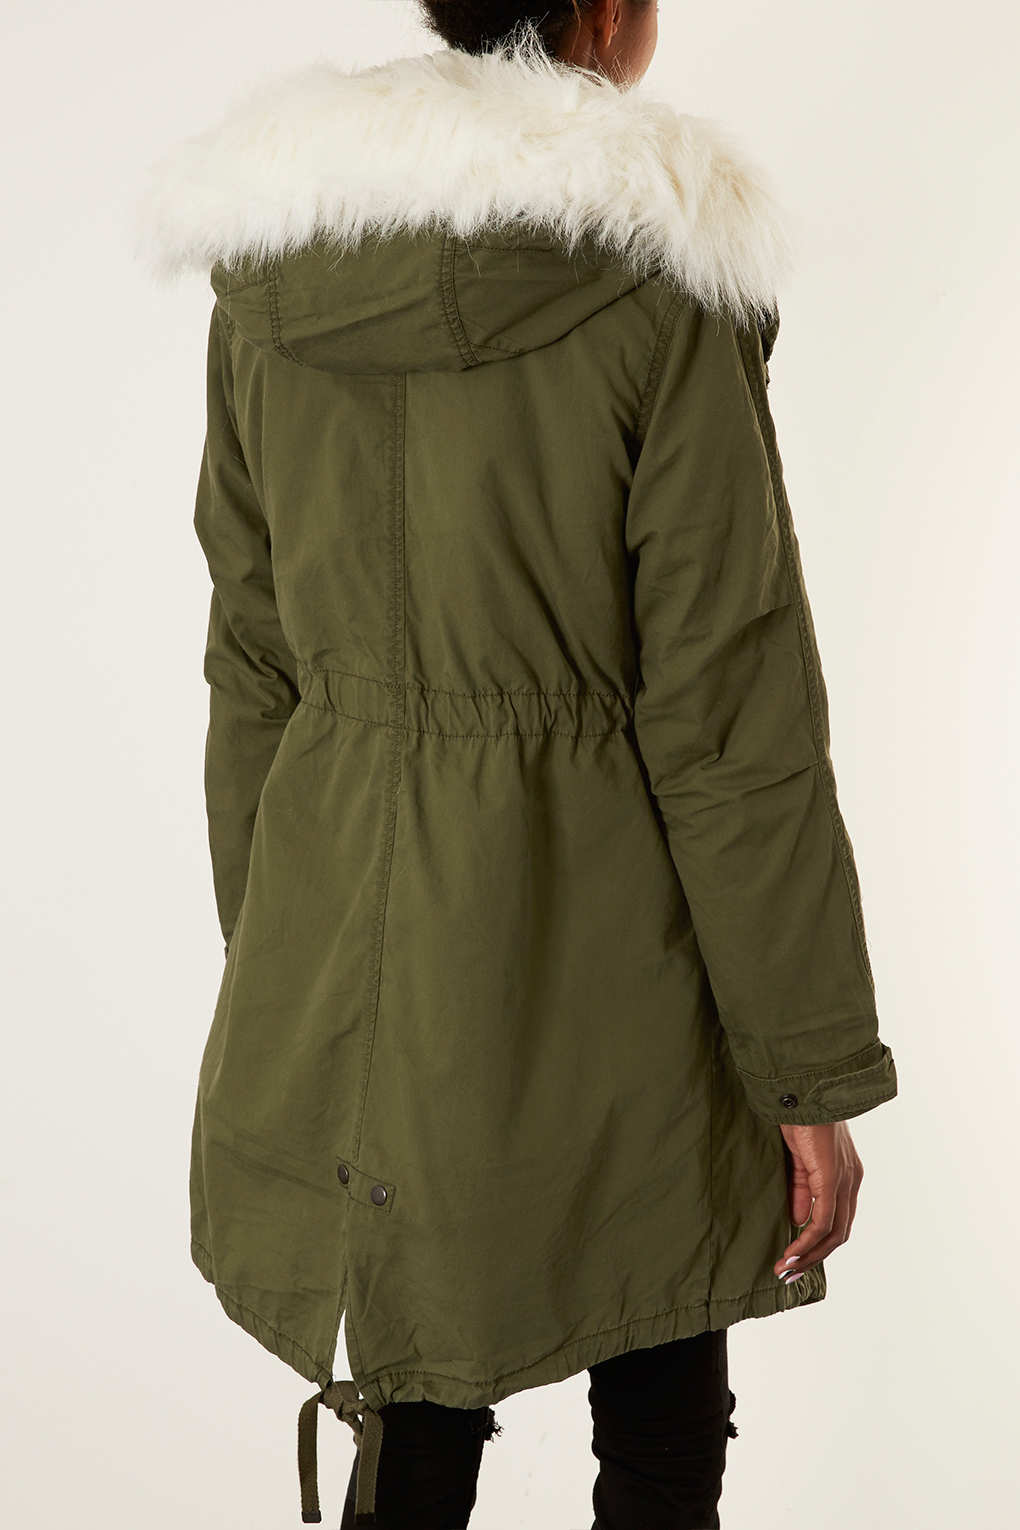 Lyst - Topshop Borg Lined Parka Jacket in Natural